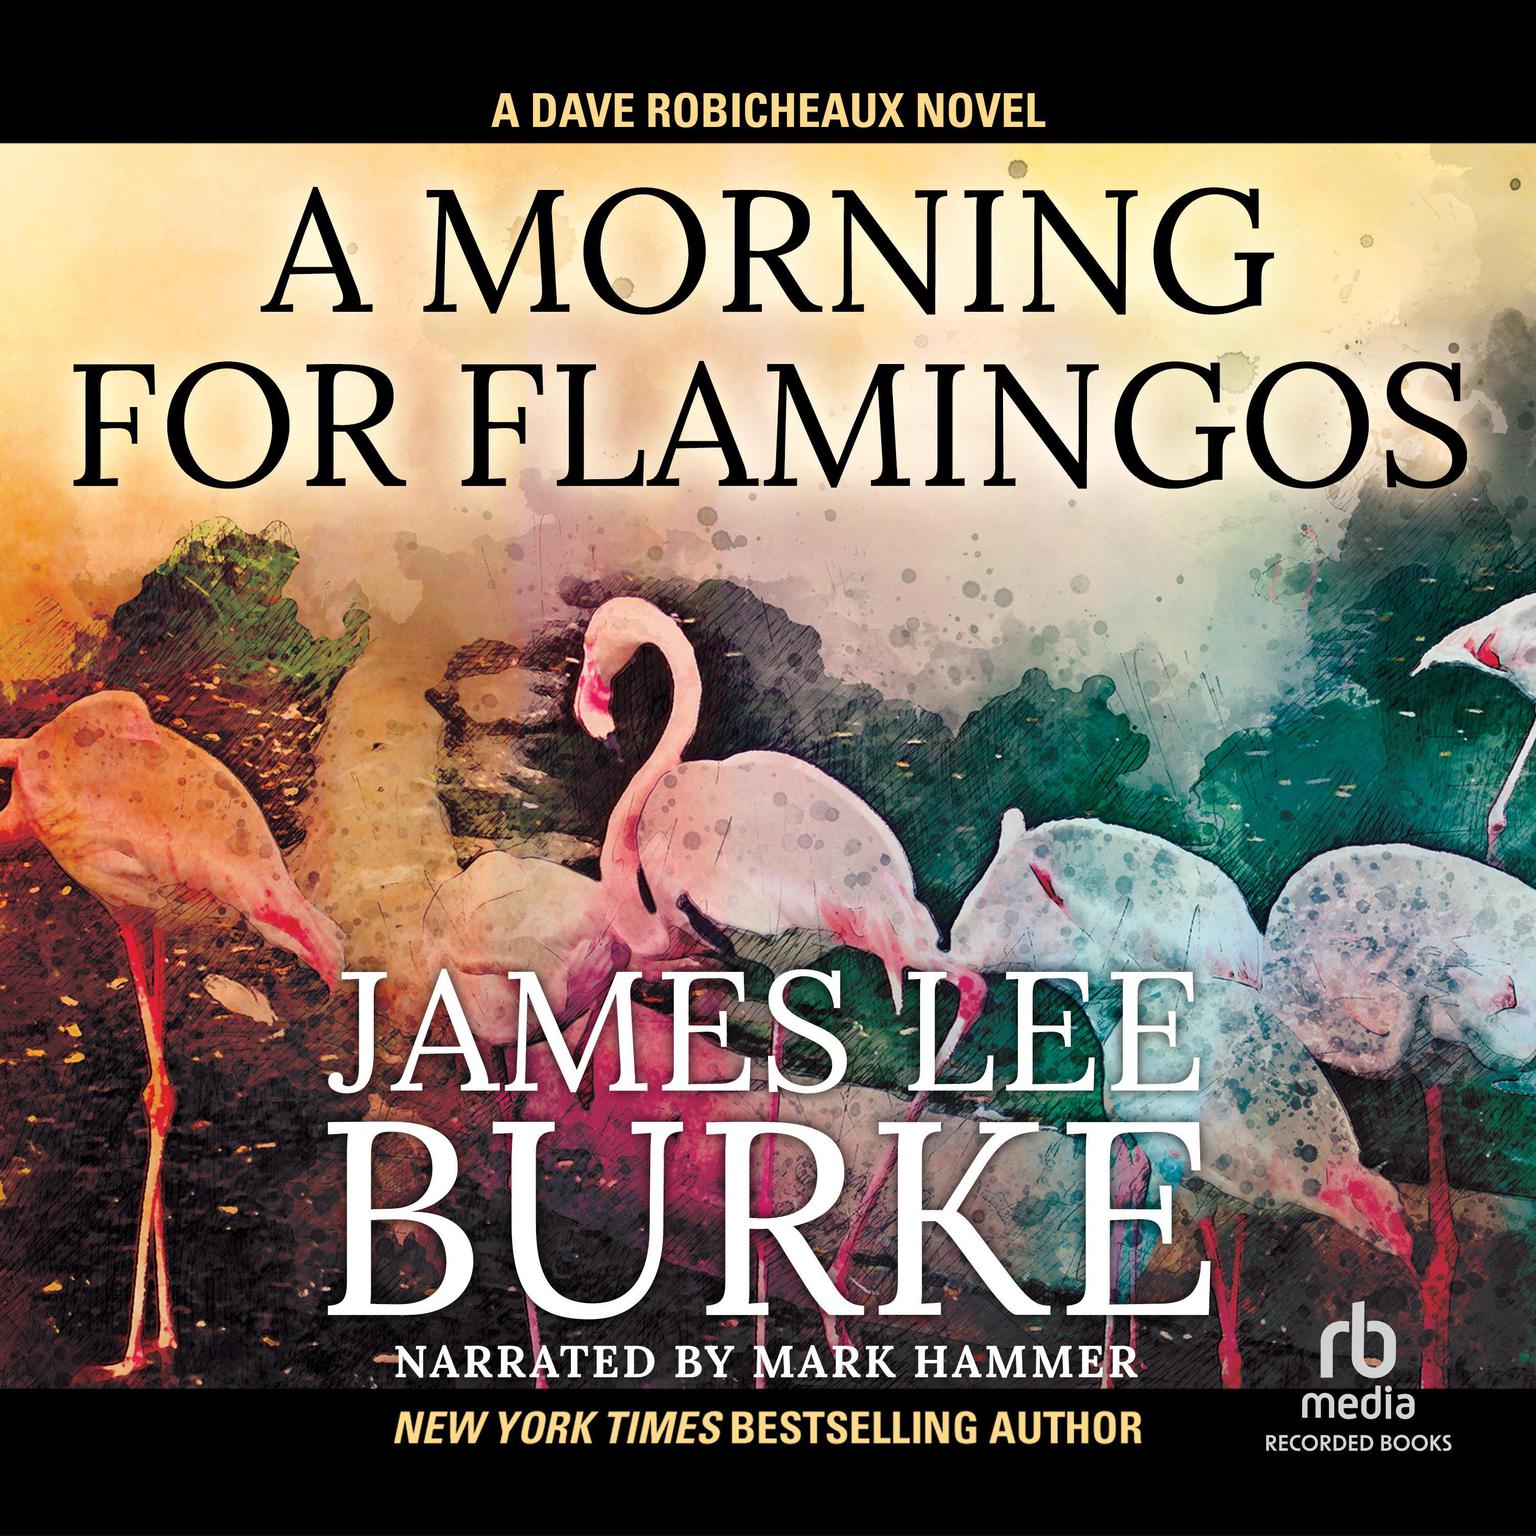 A Morning for Flamingos Audiobook, by James Lee Burke